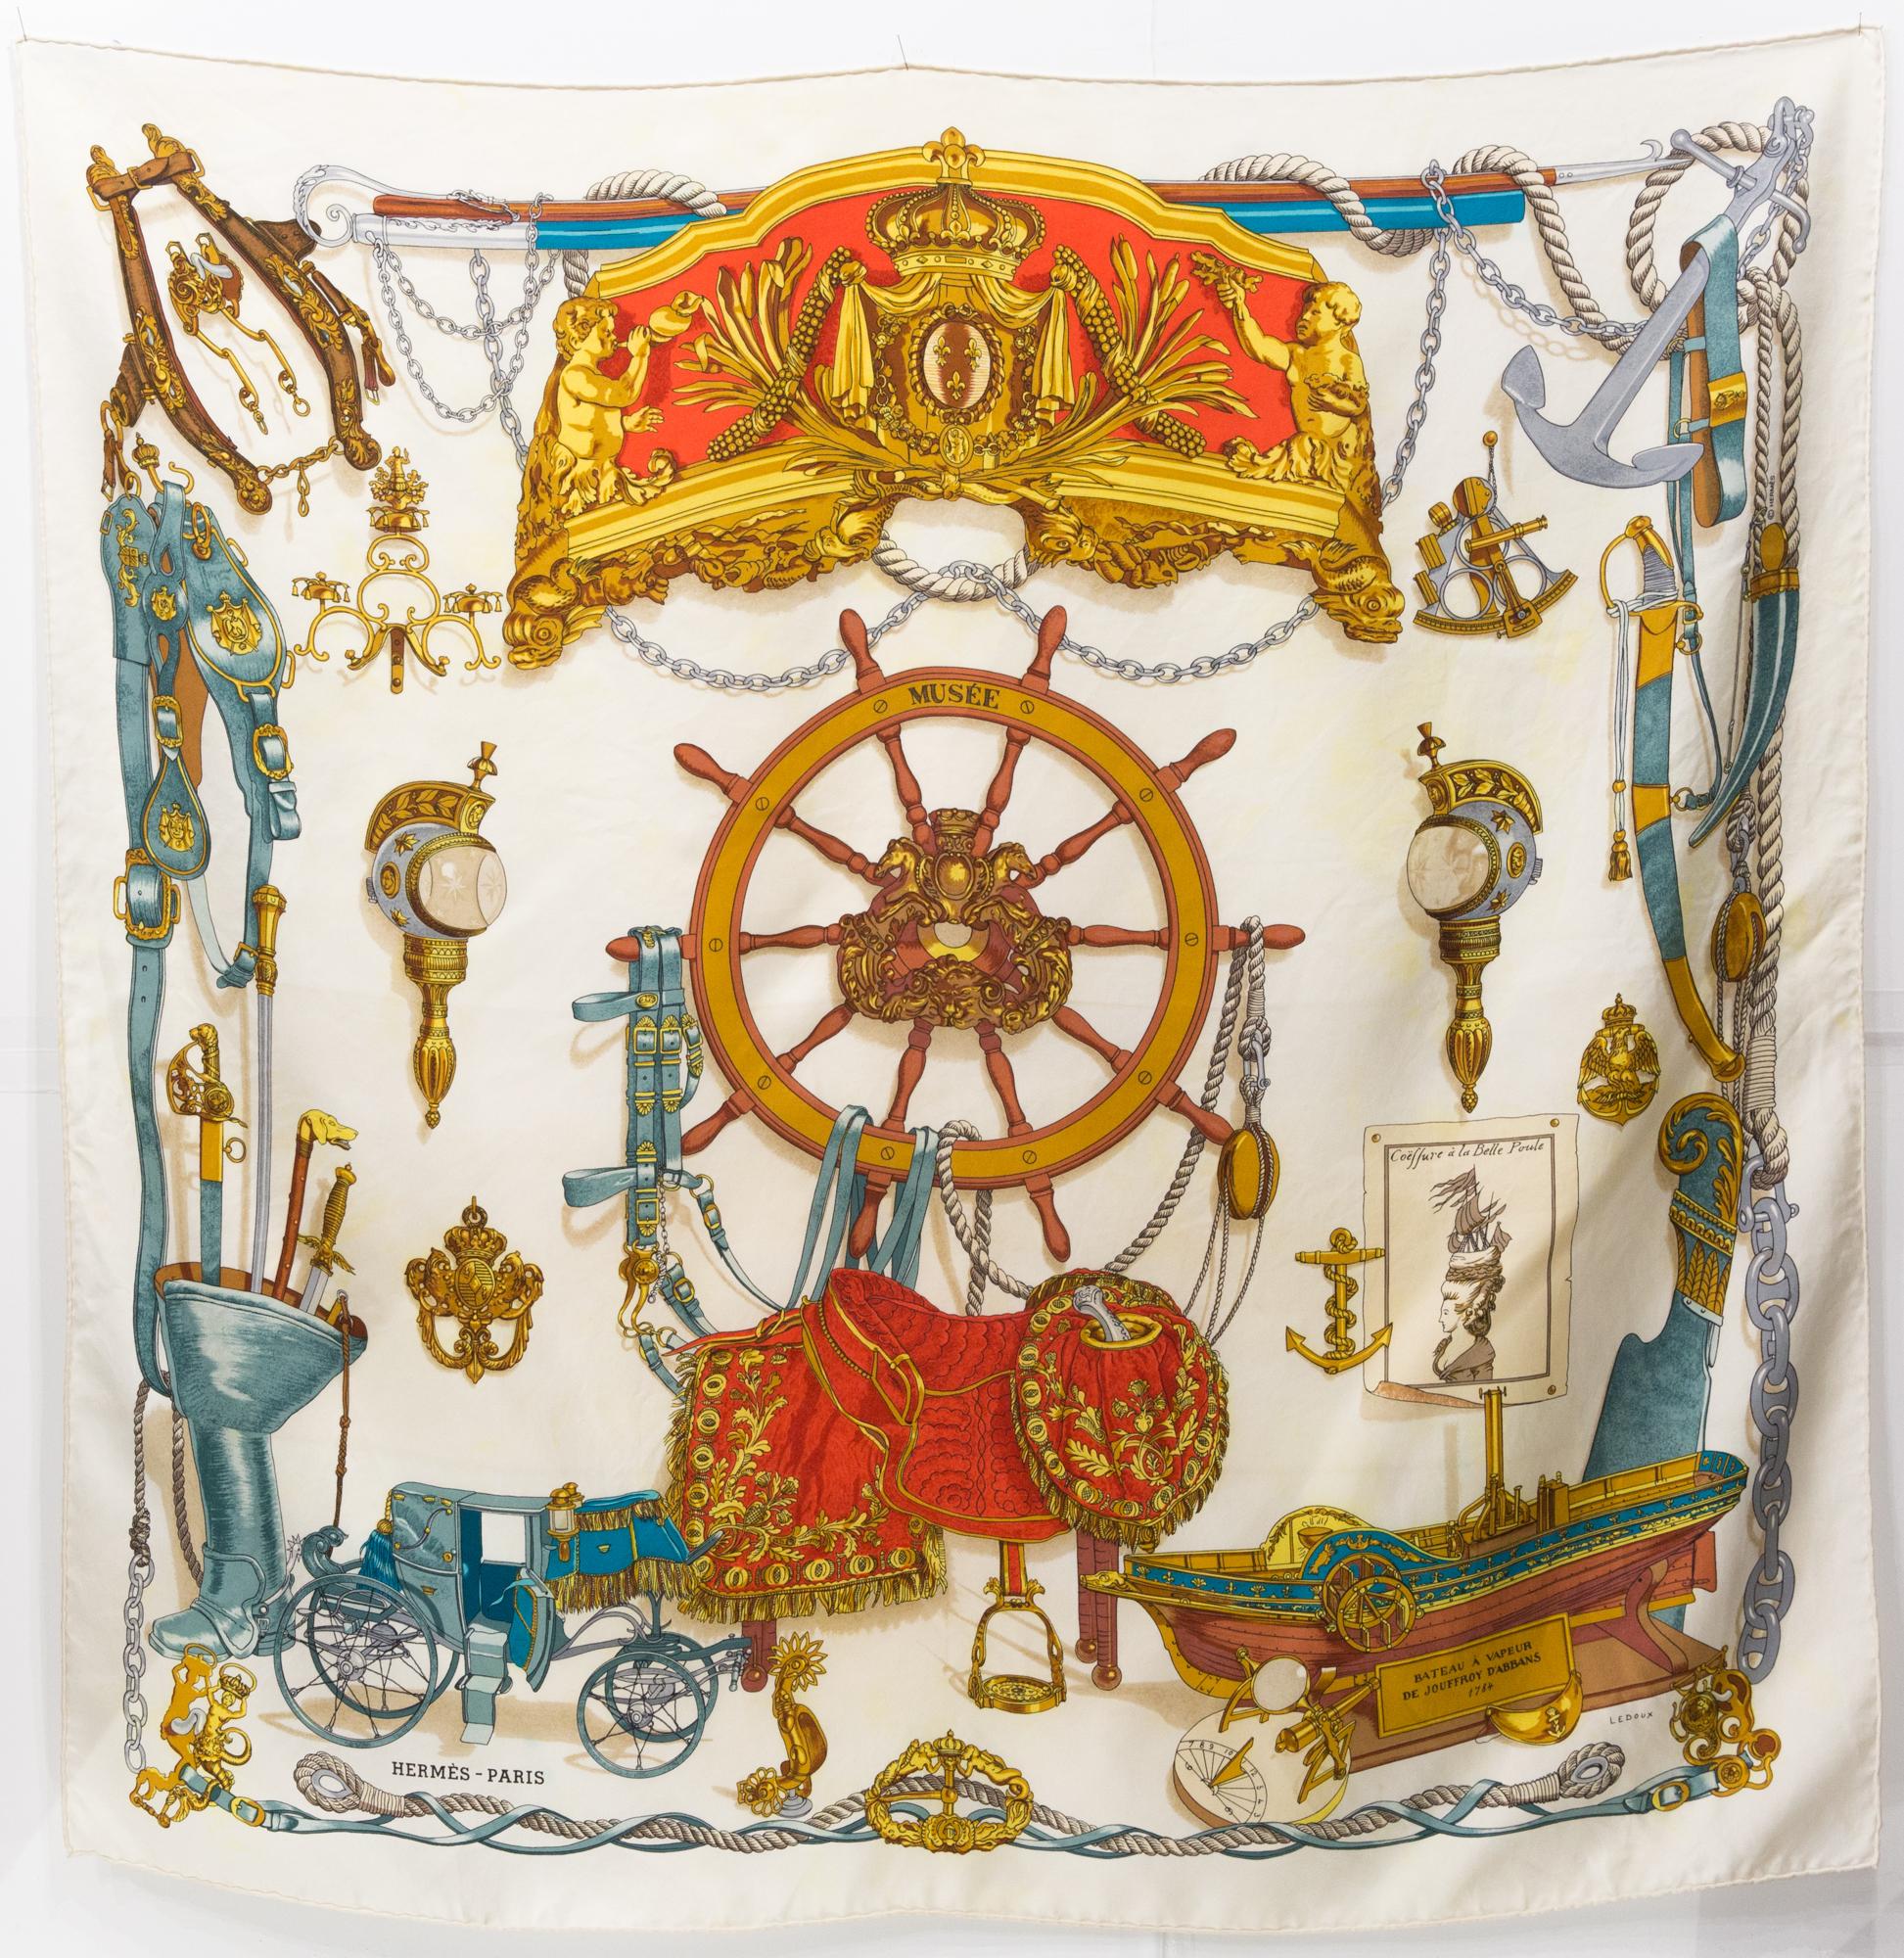 Hermes Musee by Philippe Ledoux Silk Scarf For Sale 3